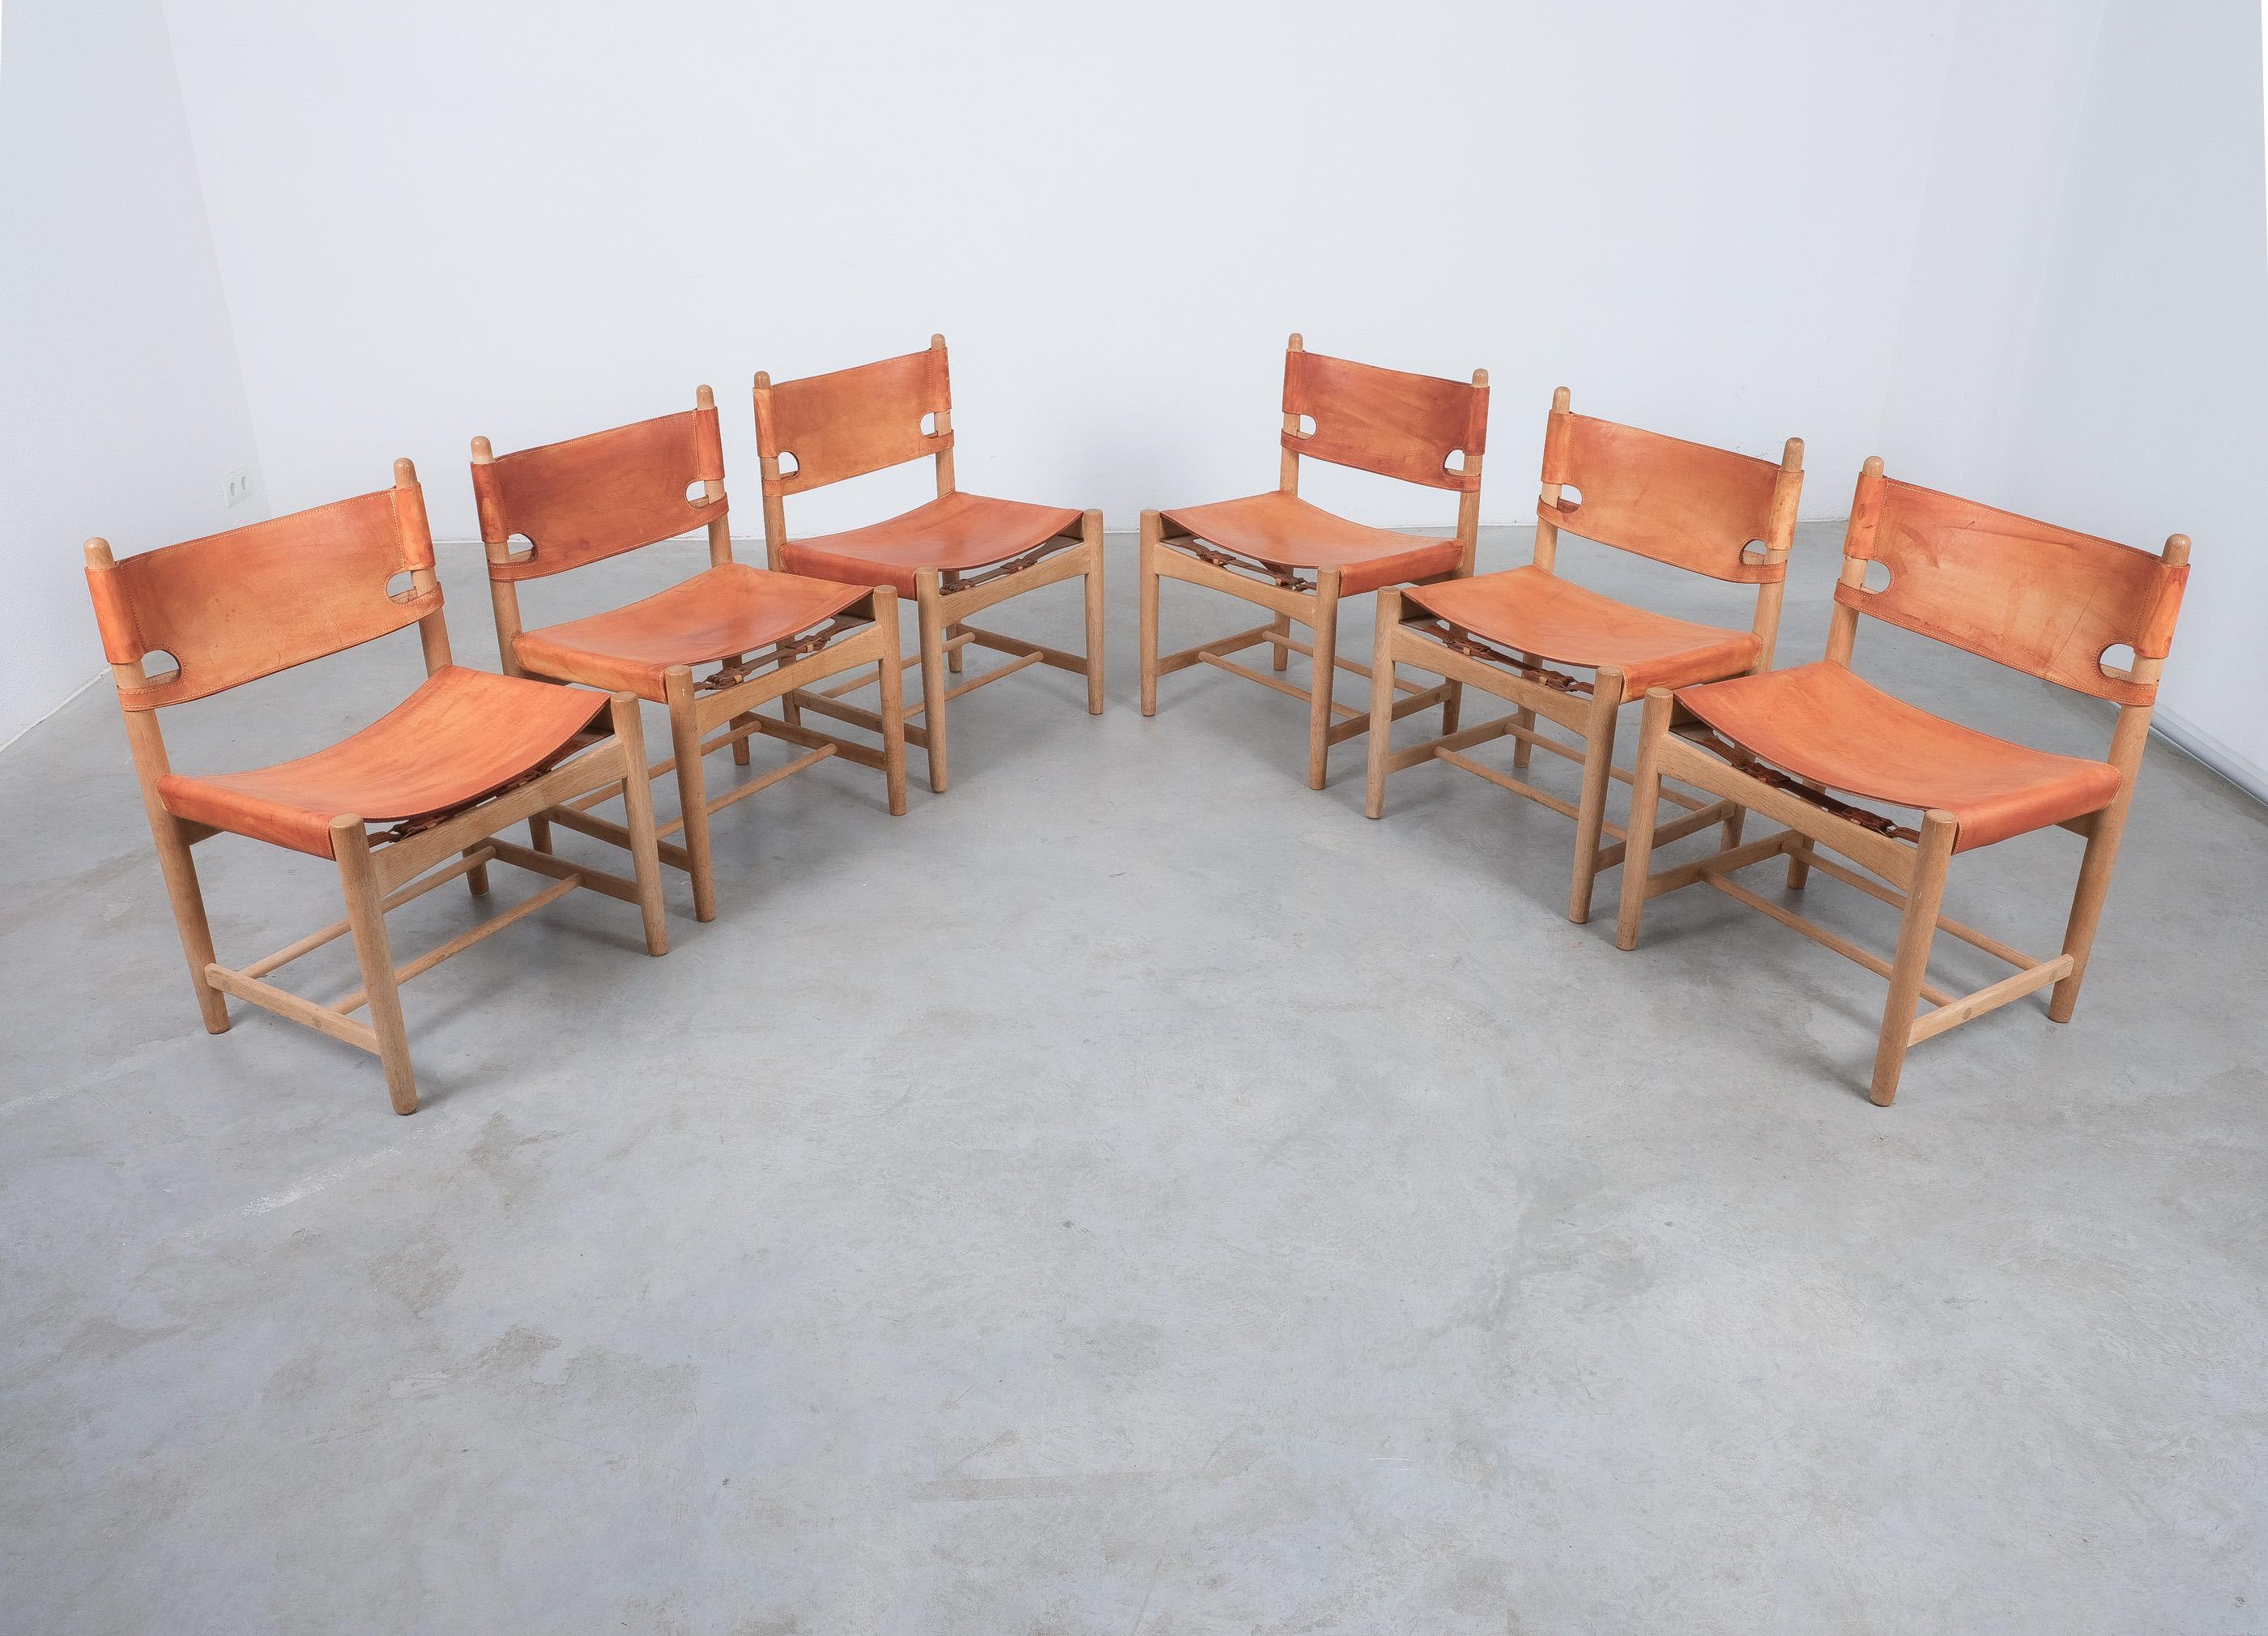 Wonderful set of 6 dining chairs by - Børge Mogensen  Mod. 3238 for Fredericia Furniture, 1970 + 6 original cushions, labelled 

This is a beautiful set of 6 mod. 3238 chairs from waxed oak with natural tanned leather. The basic design and